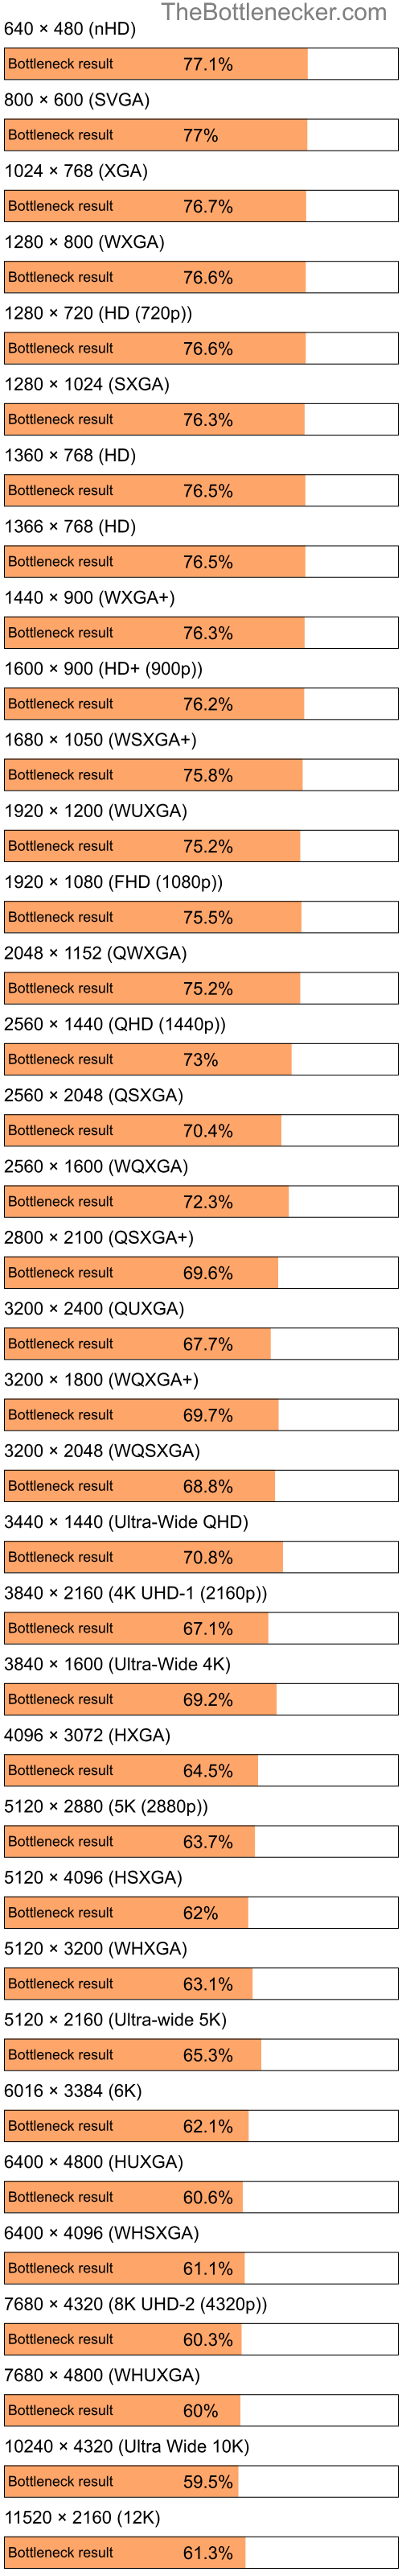 Bottleneck results by resolution for Intel Pentium 4 and NVIDIA GeForce GTX 1660 in Graphic Card Intense Tasks